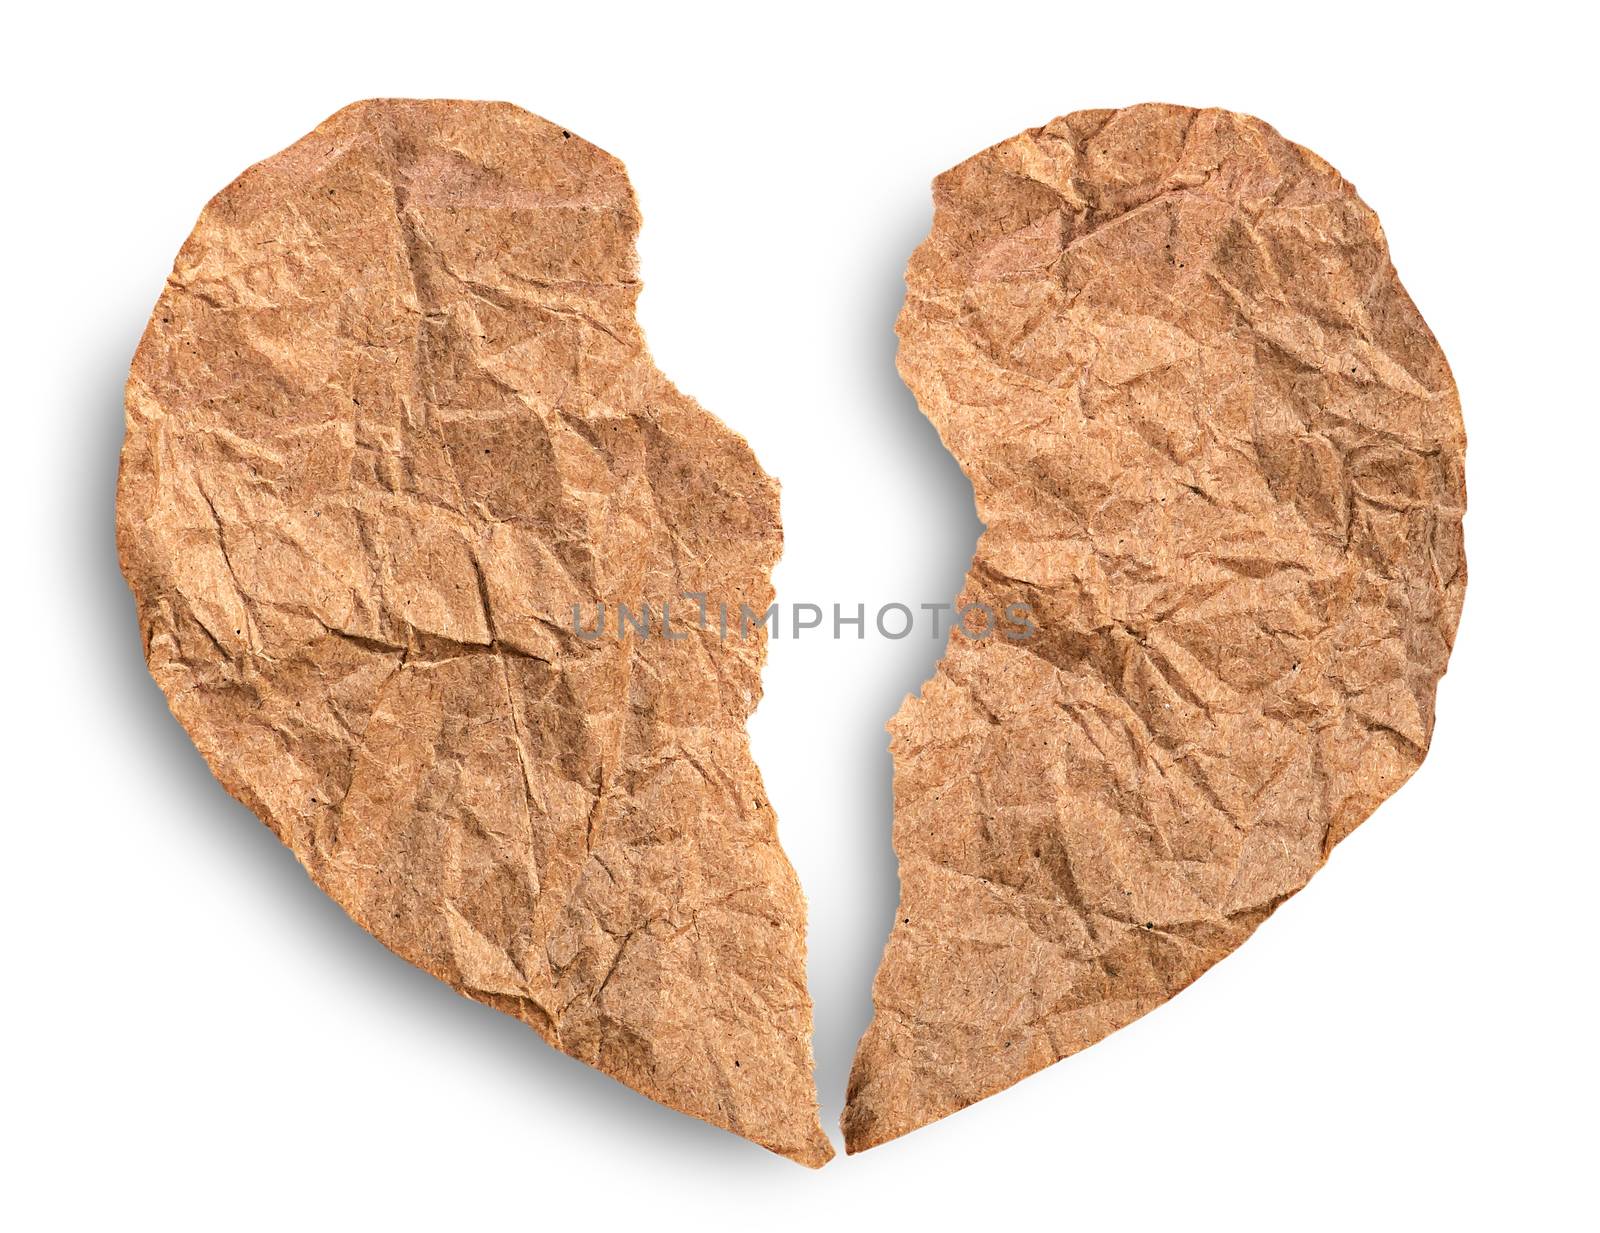 Rumpled torn paper heart isolated on white background